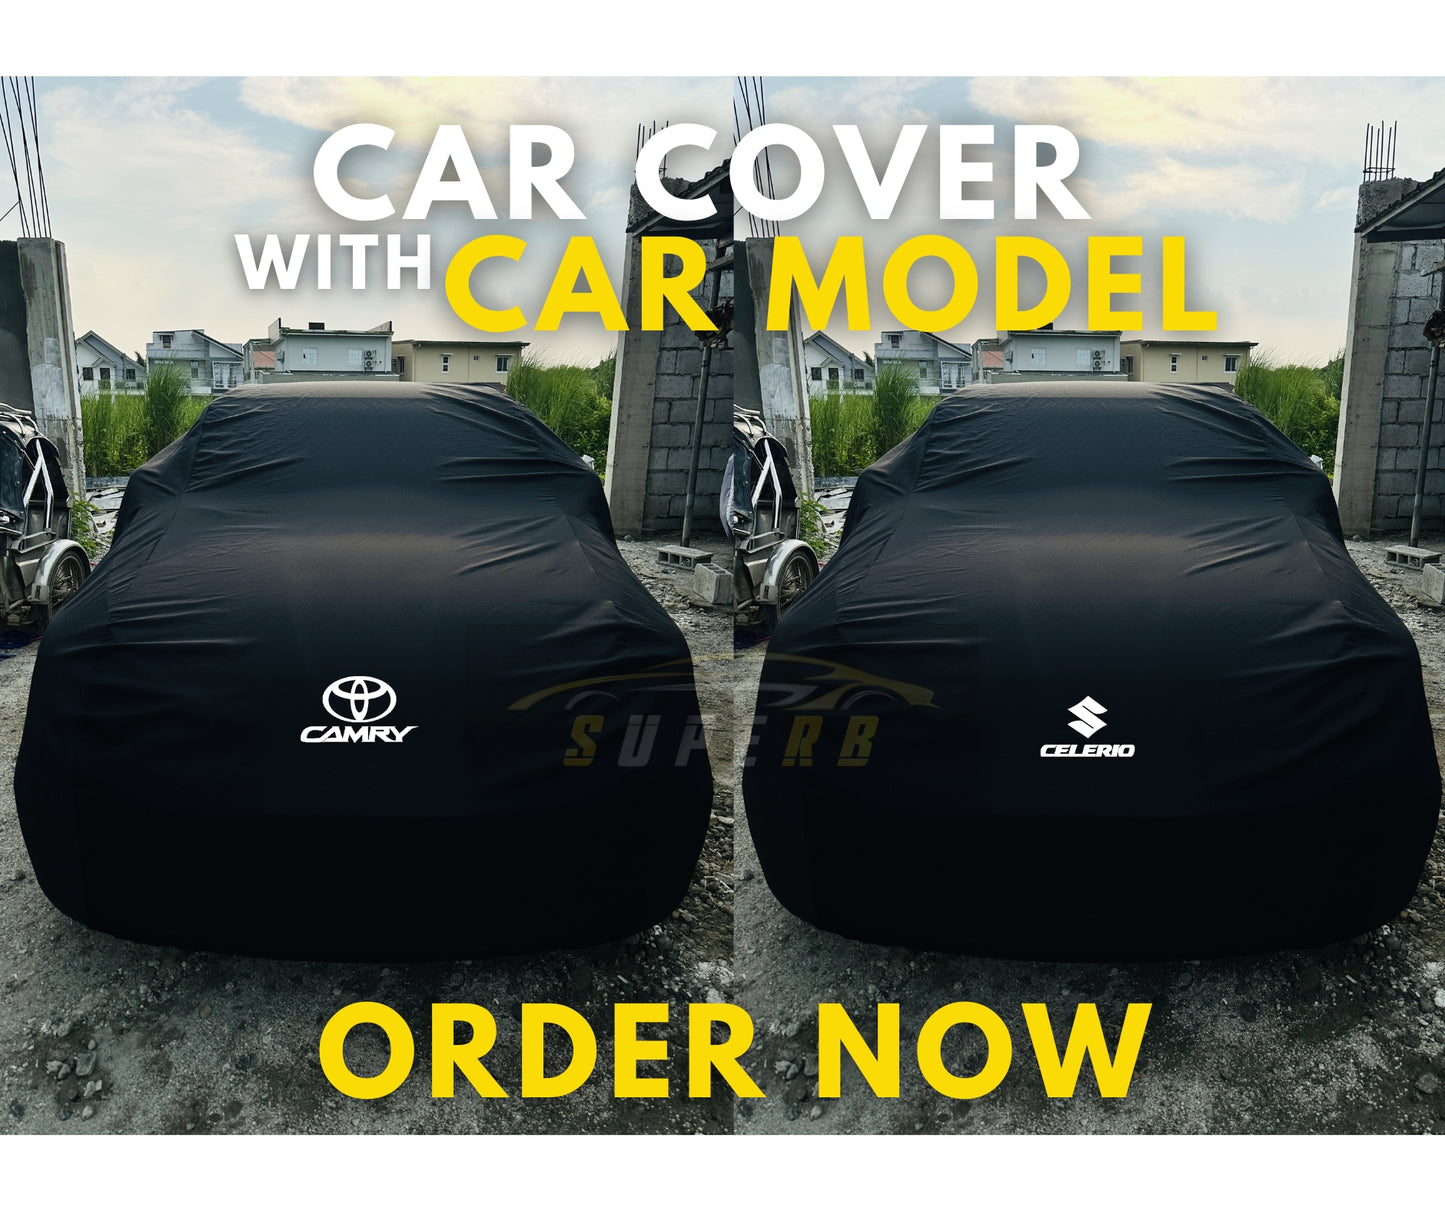 SUPERB CLASSIC CAR COVER with CAR MODELS